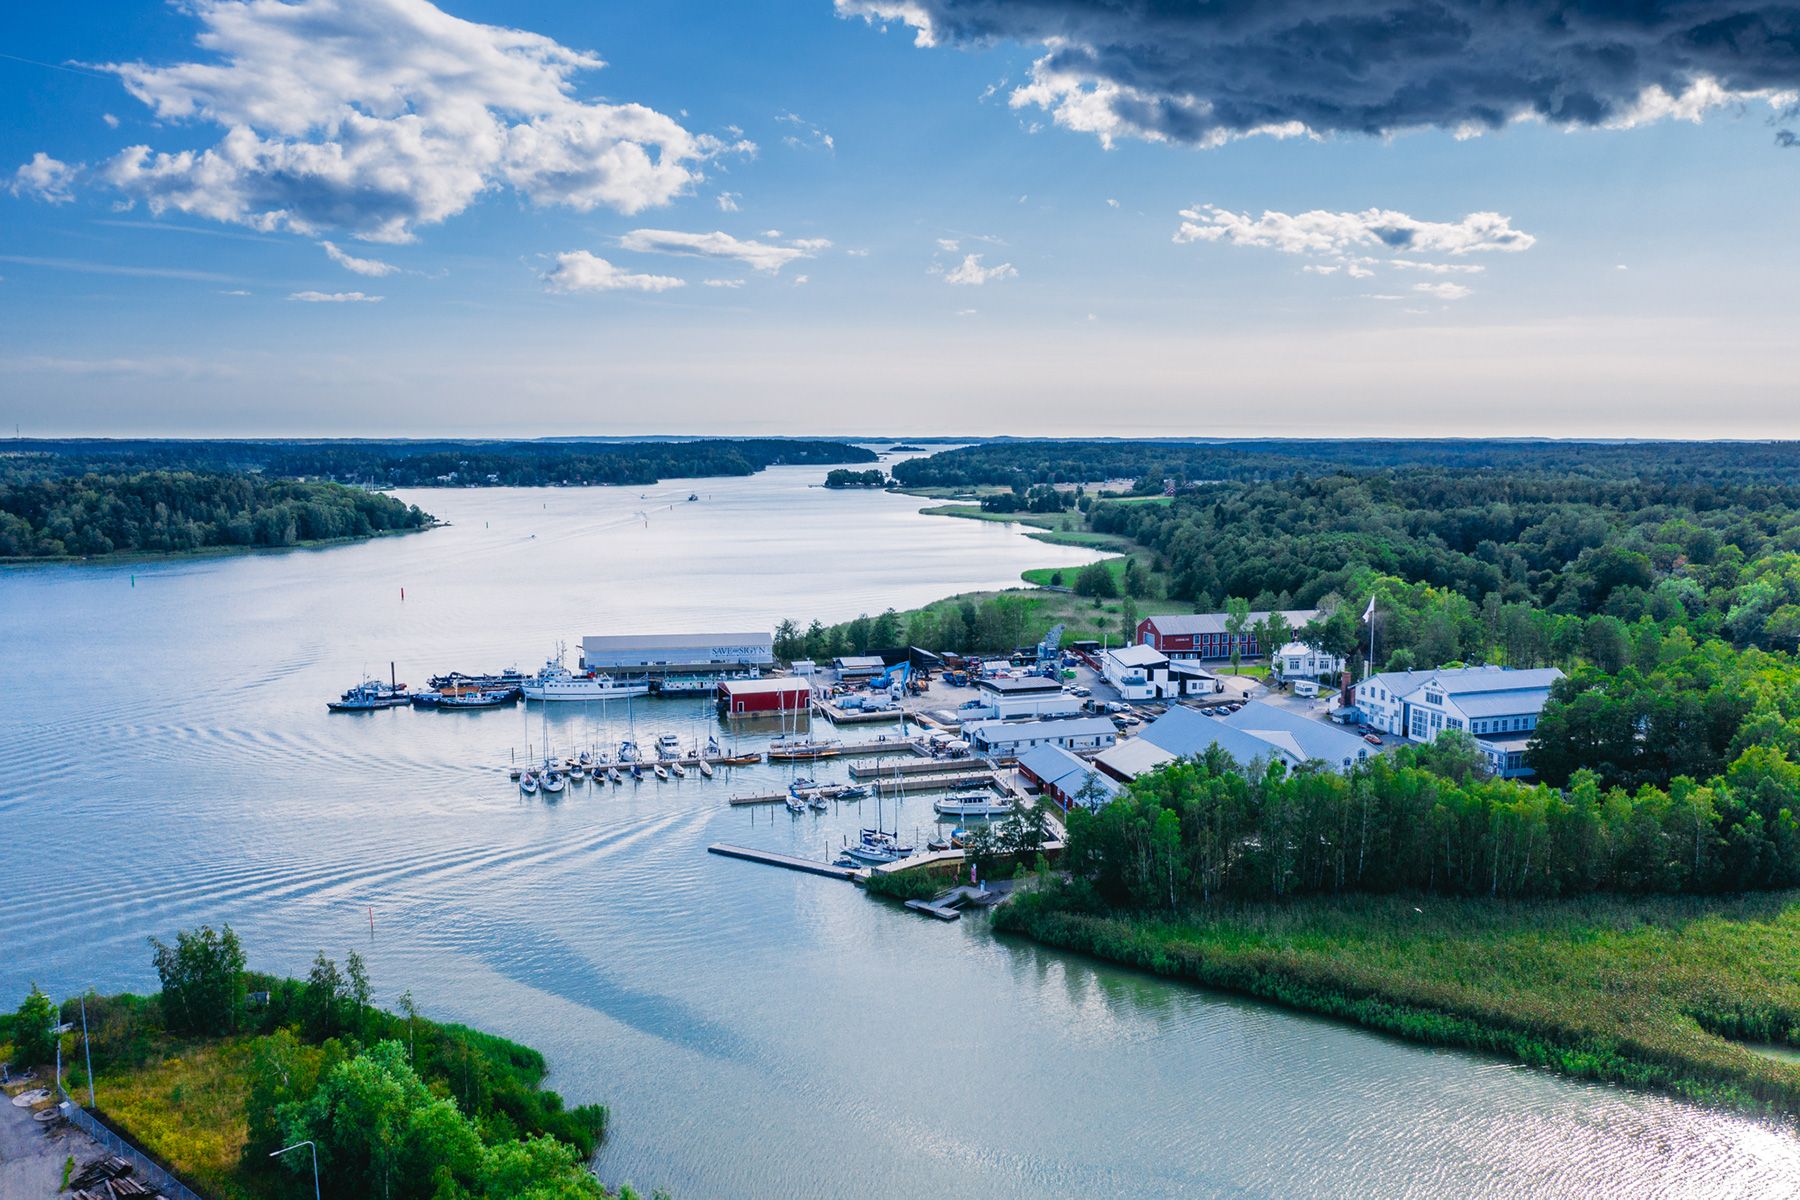 An aerial shot of Ruissalo Boatyard, where boats have been anchored a summer's day.